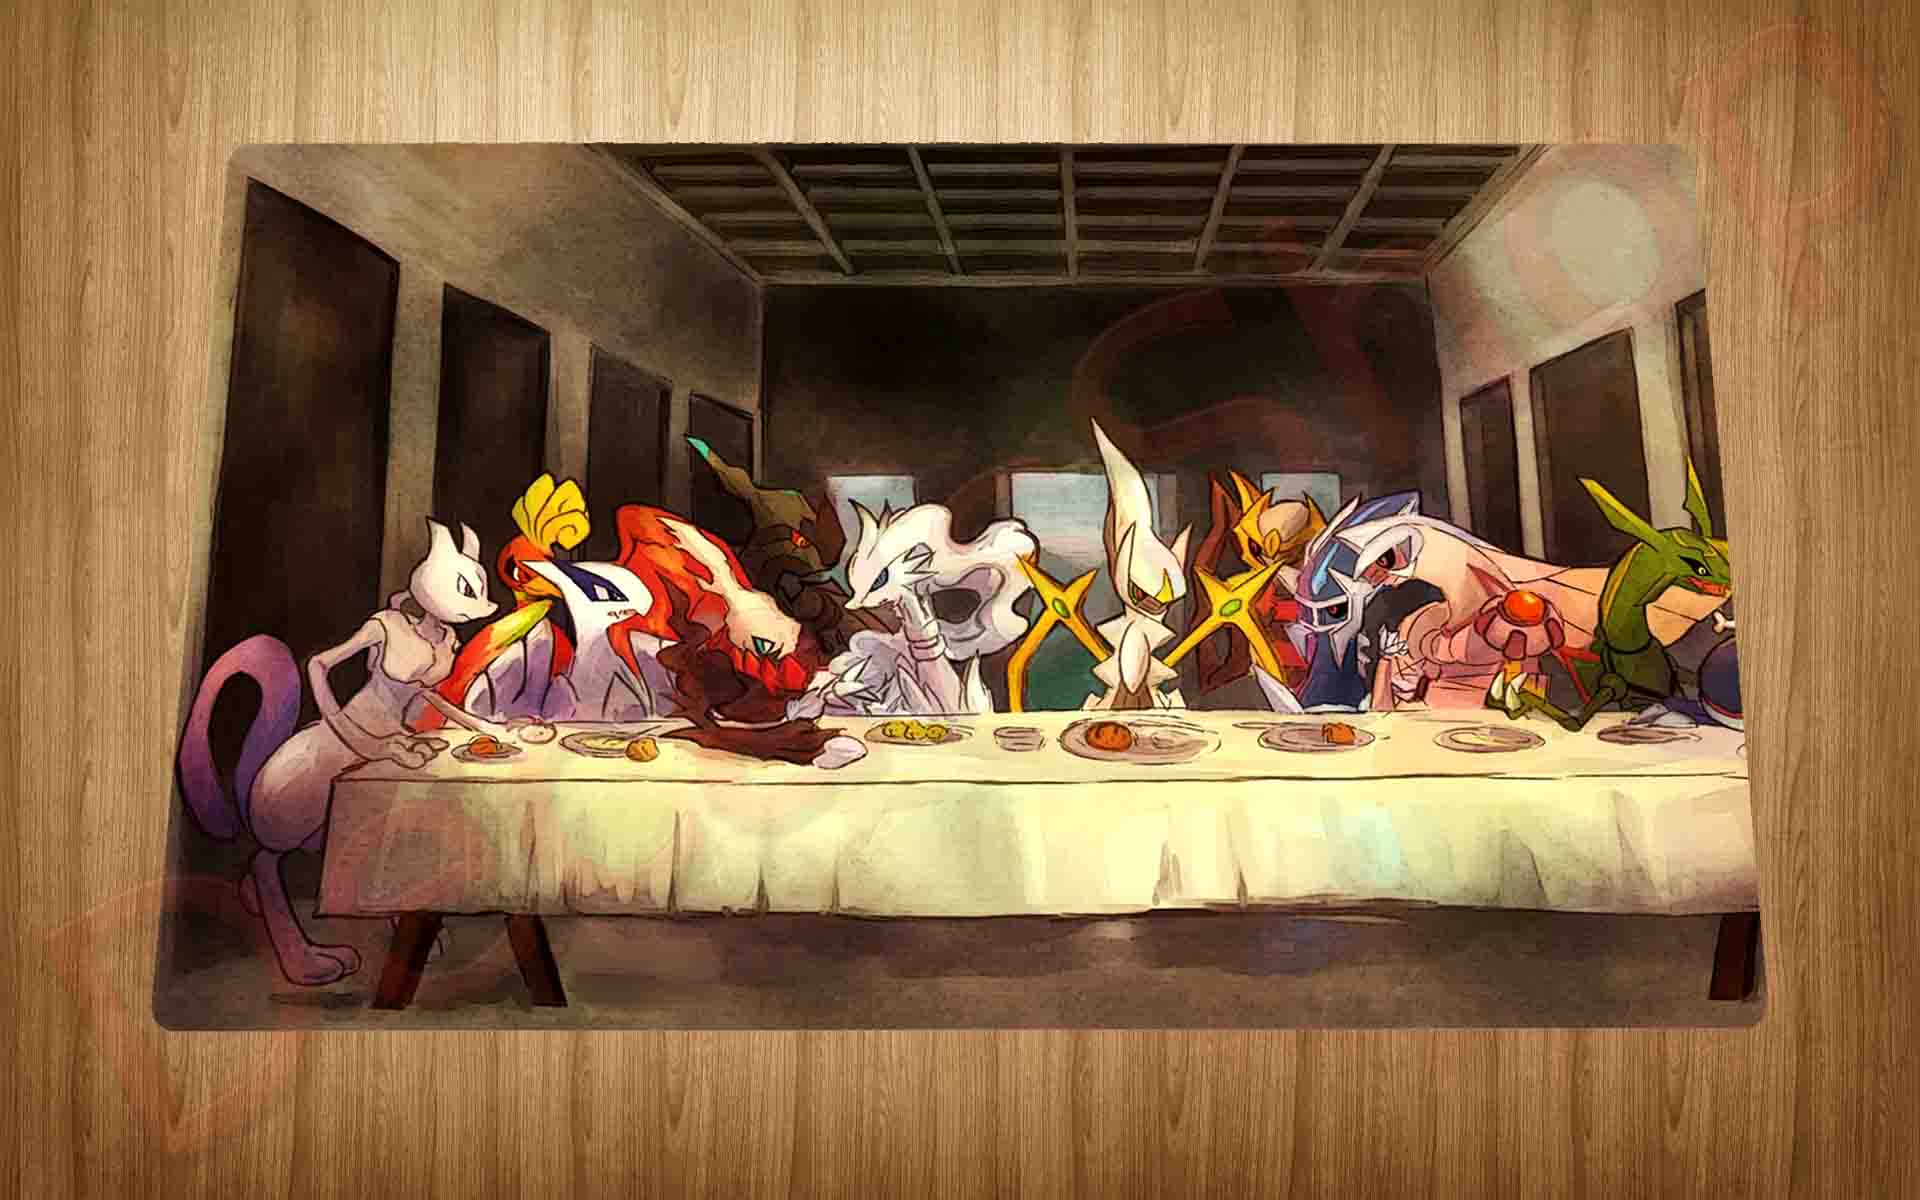 Last Supper Pokemon Mewtwo Arceus Game Playmat Play Mat MousePad Anime FREE  SHIPPING – Flags, Banners, Posters …